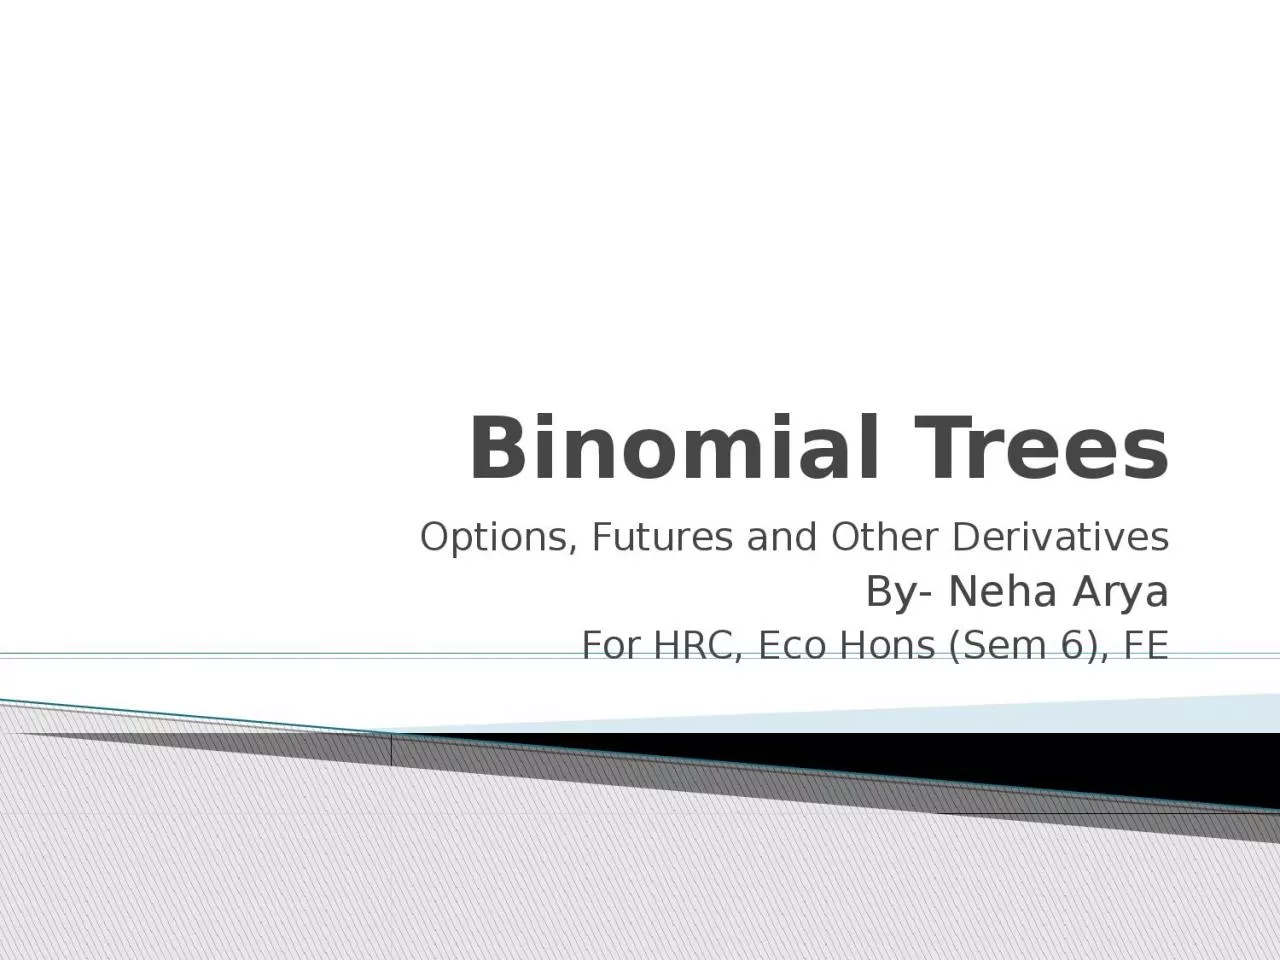 Binomial Trees Options, Futures and Other Derivatives